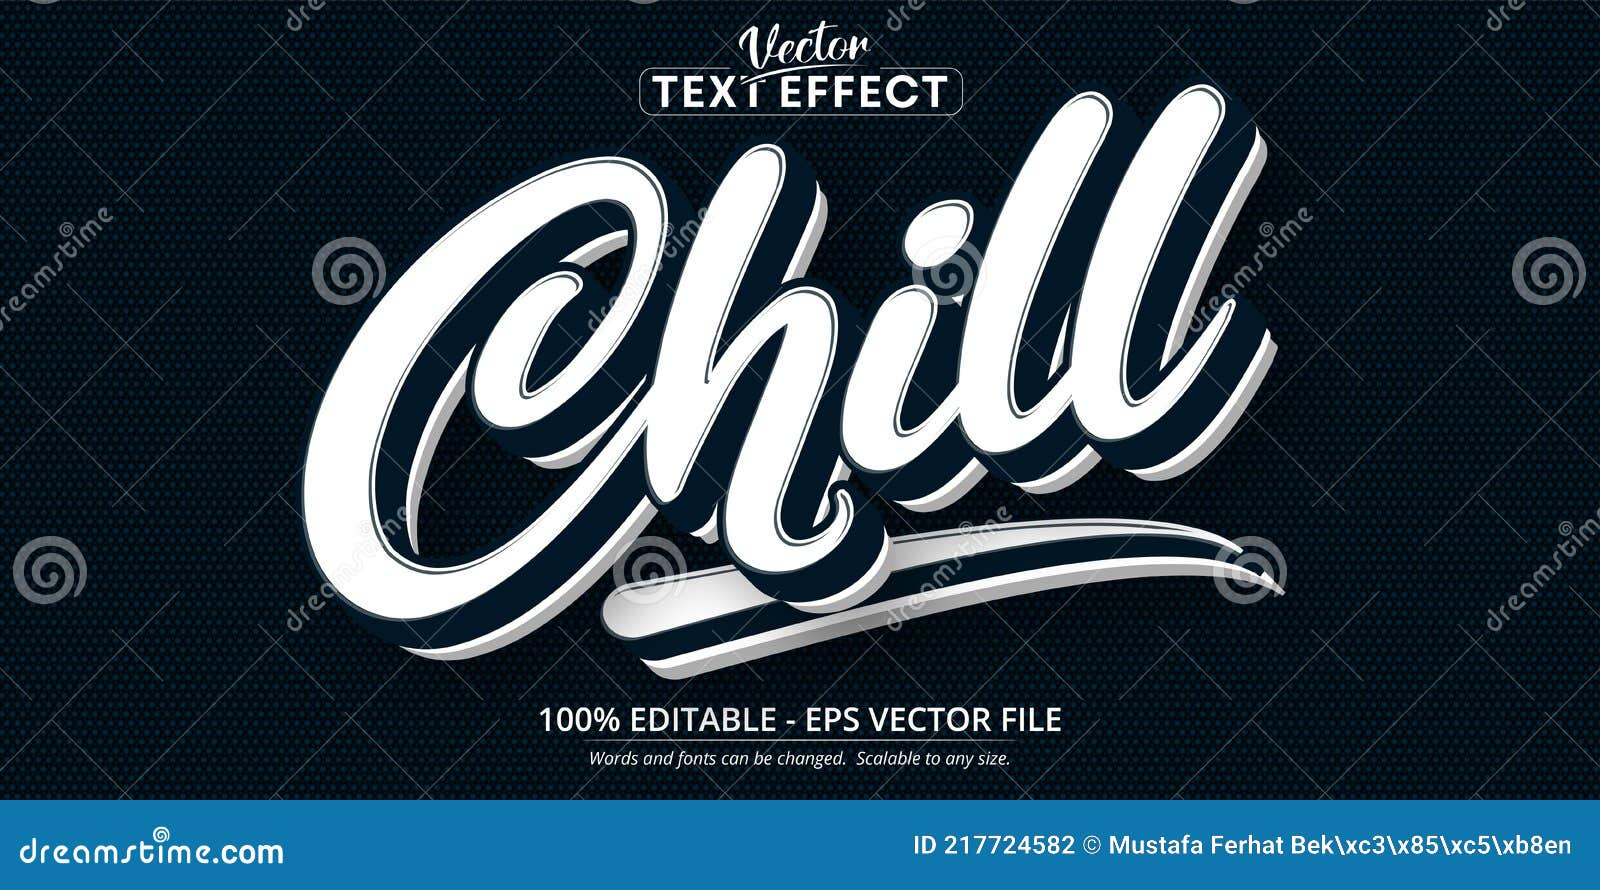 chill text, minimalistic style editable text effect